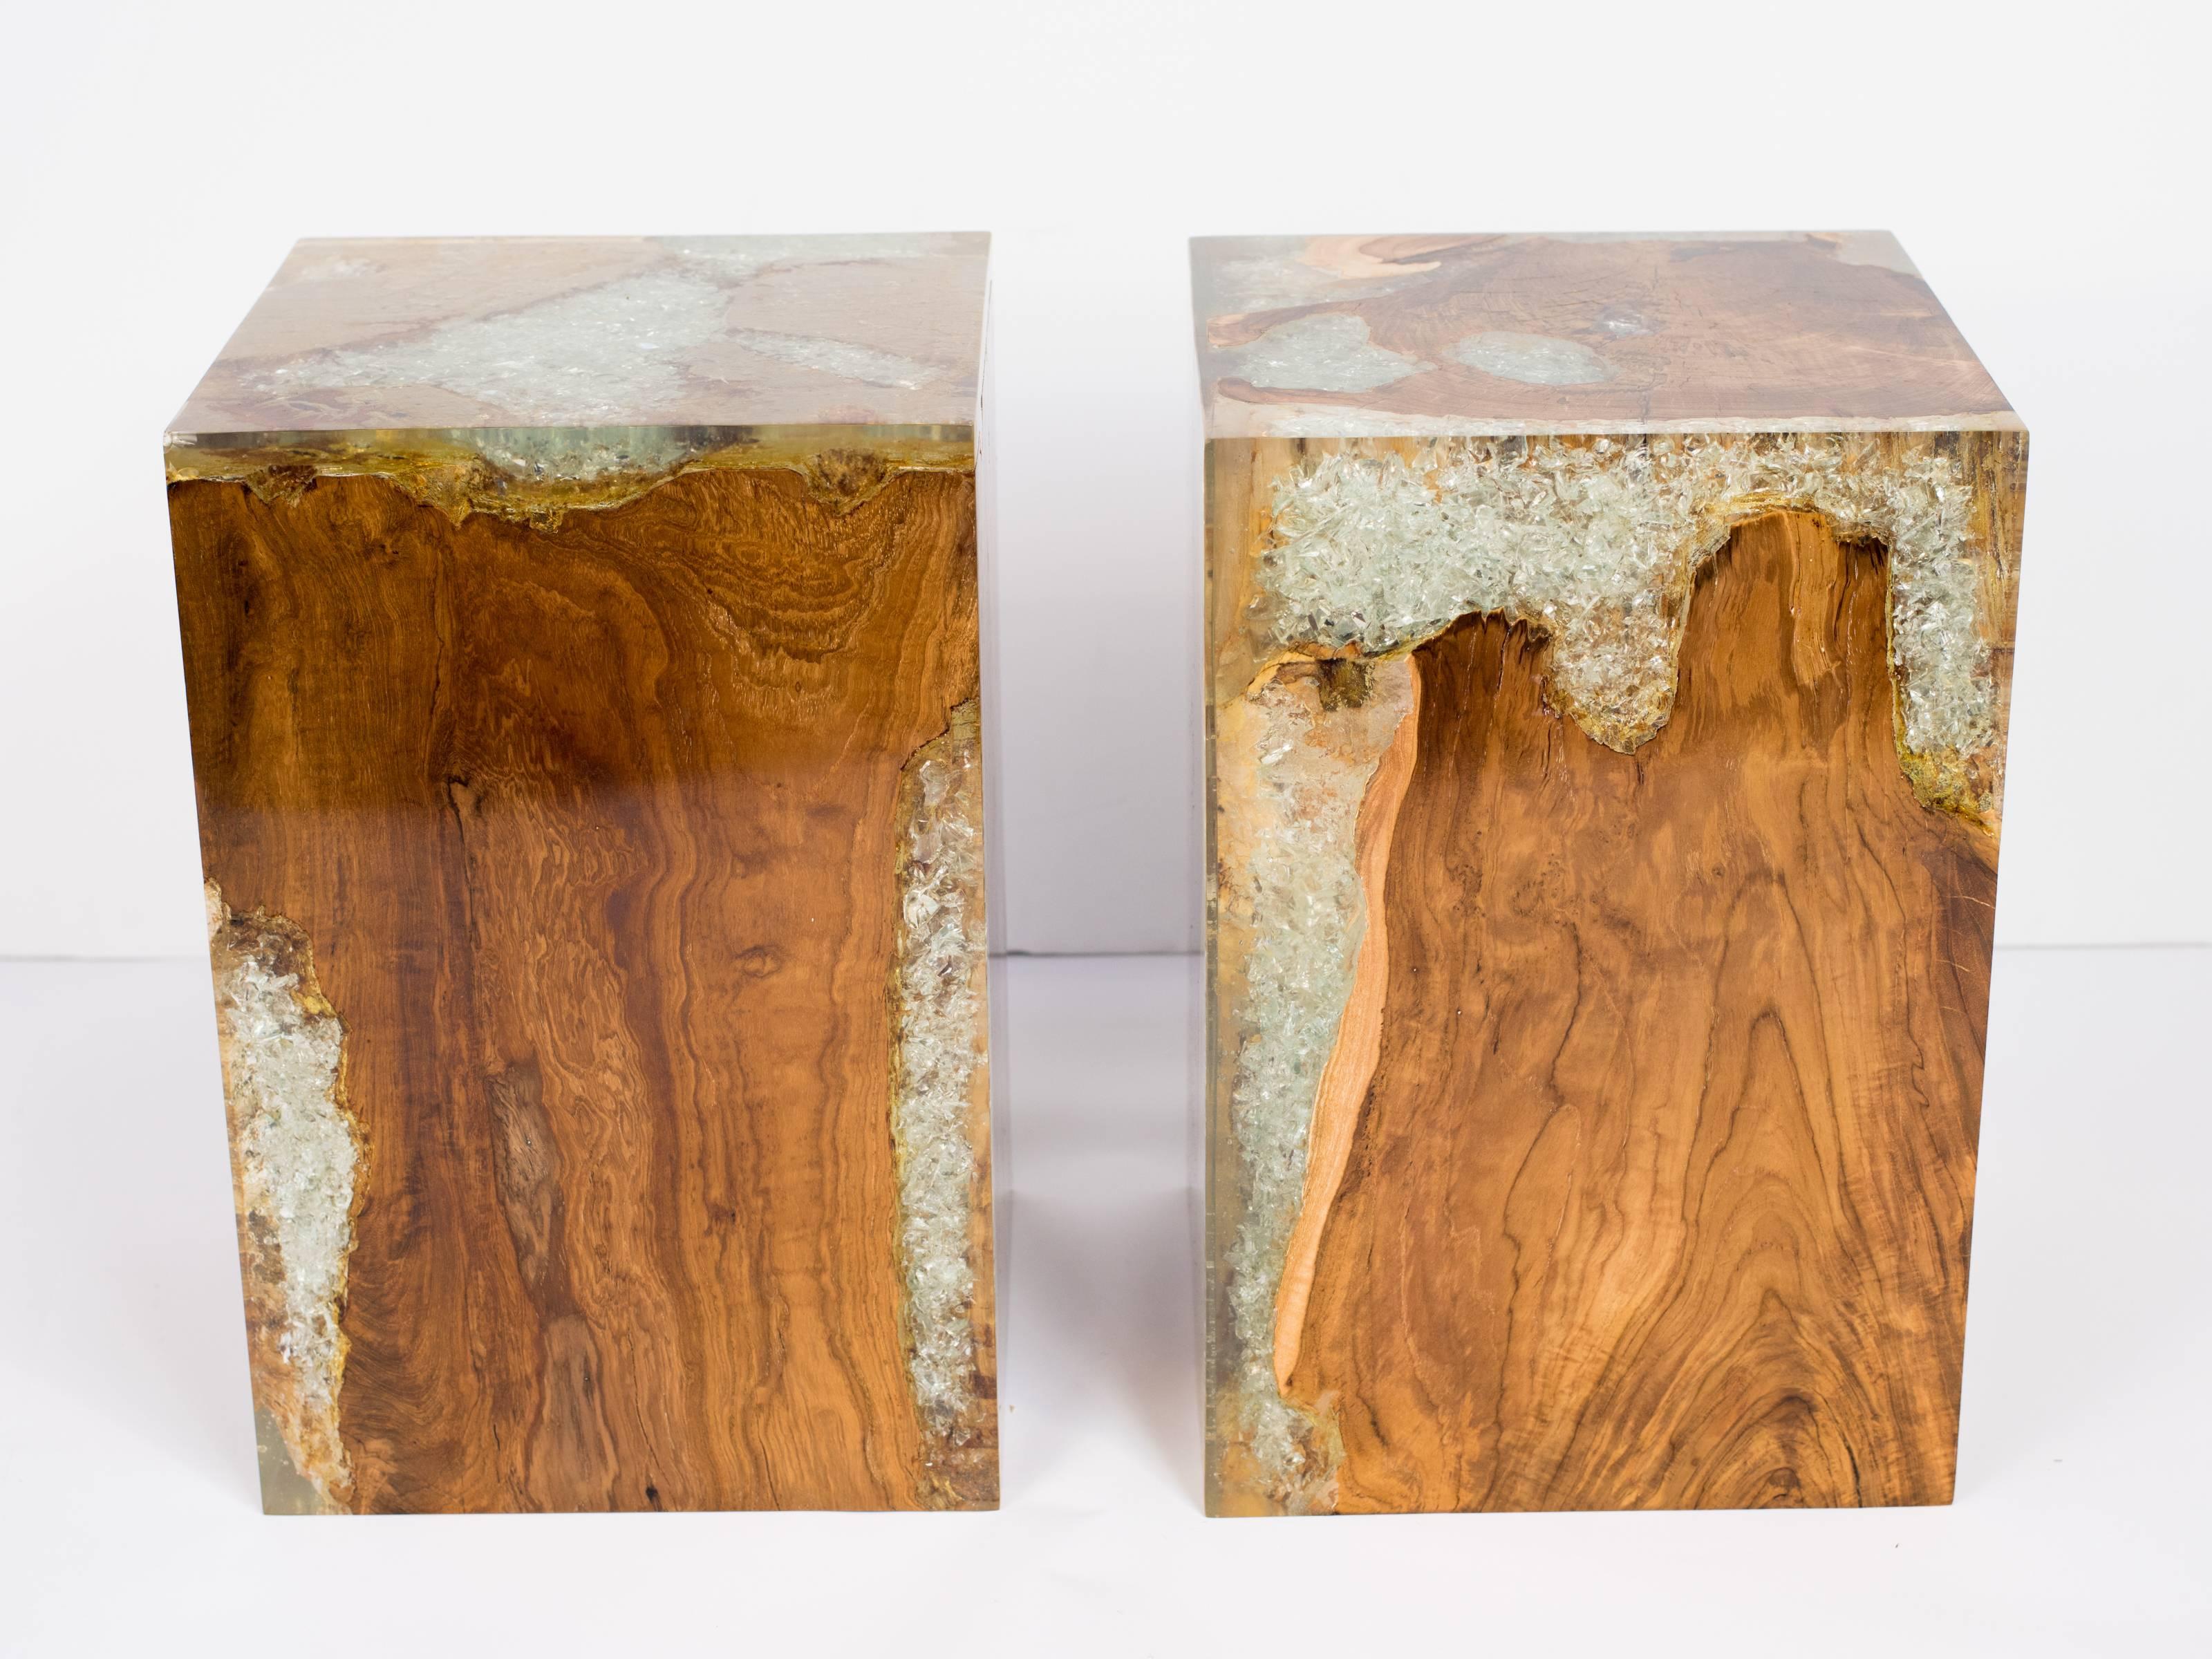 Organic modern cube tables in natural and bleached teak root wood with cracked resin design. Polished finish with unique wood variations on all sides. Hand-crafted and multi purpose use.  Expect variation in color.

